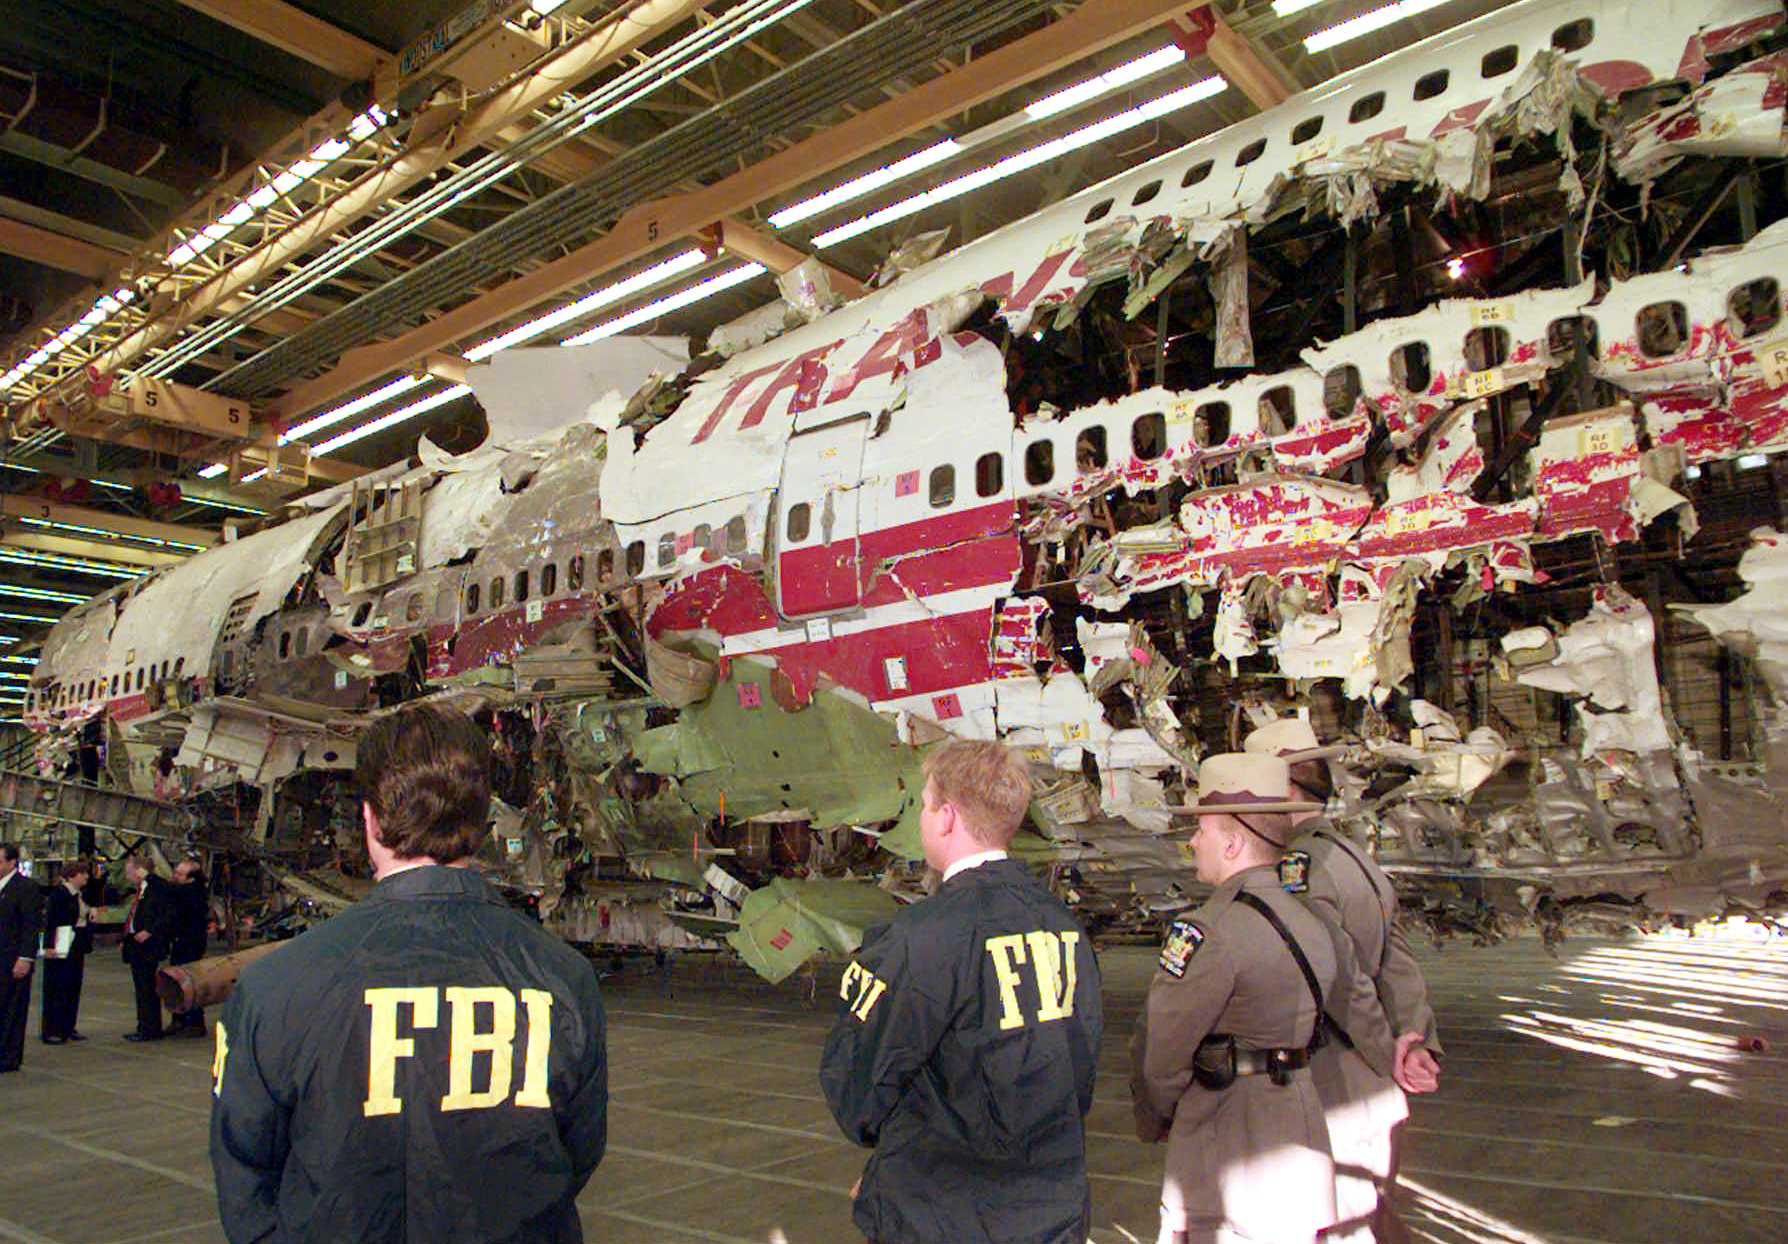 A missile or bomb was first suspected in TWA Flight 800 tragedy – New York  Daily News